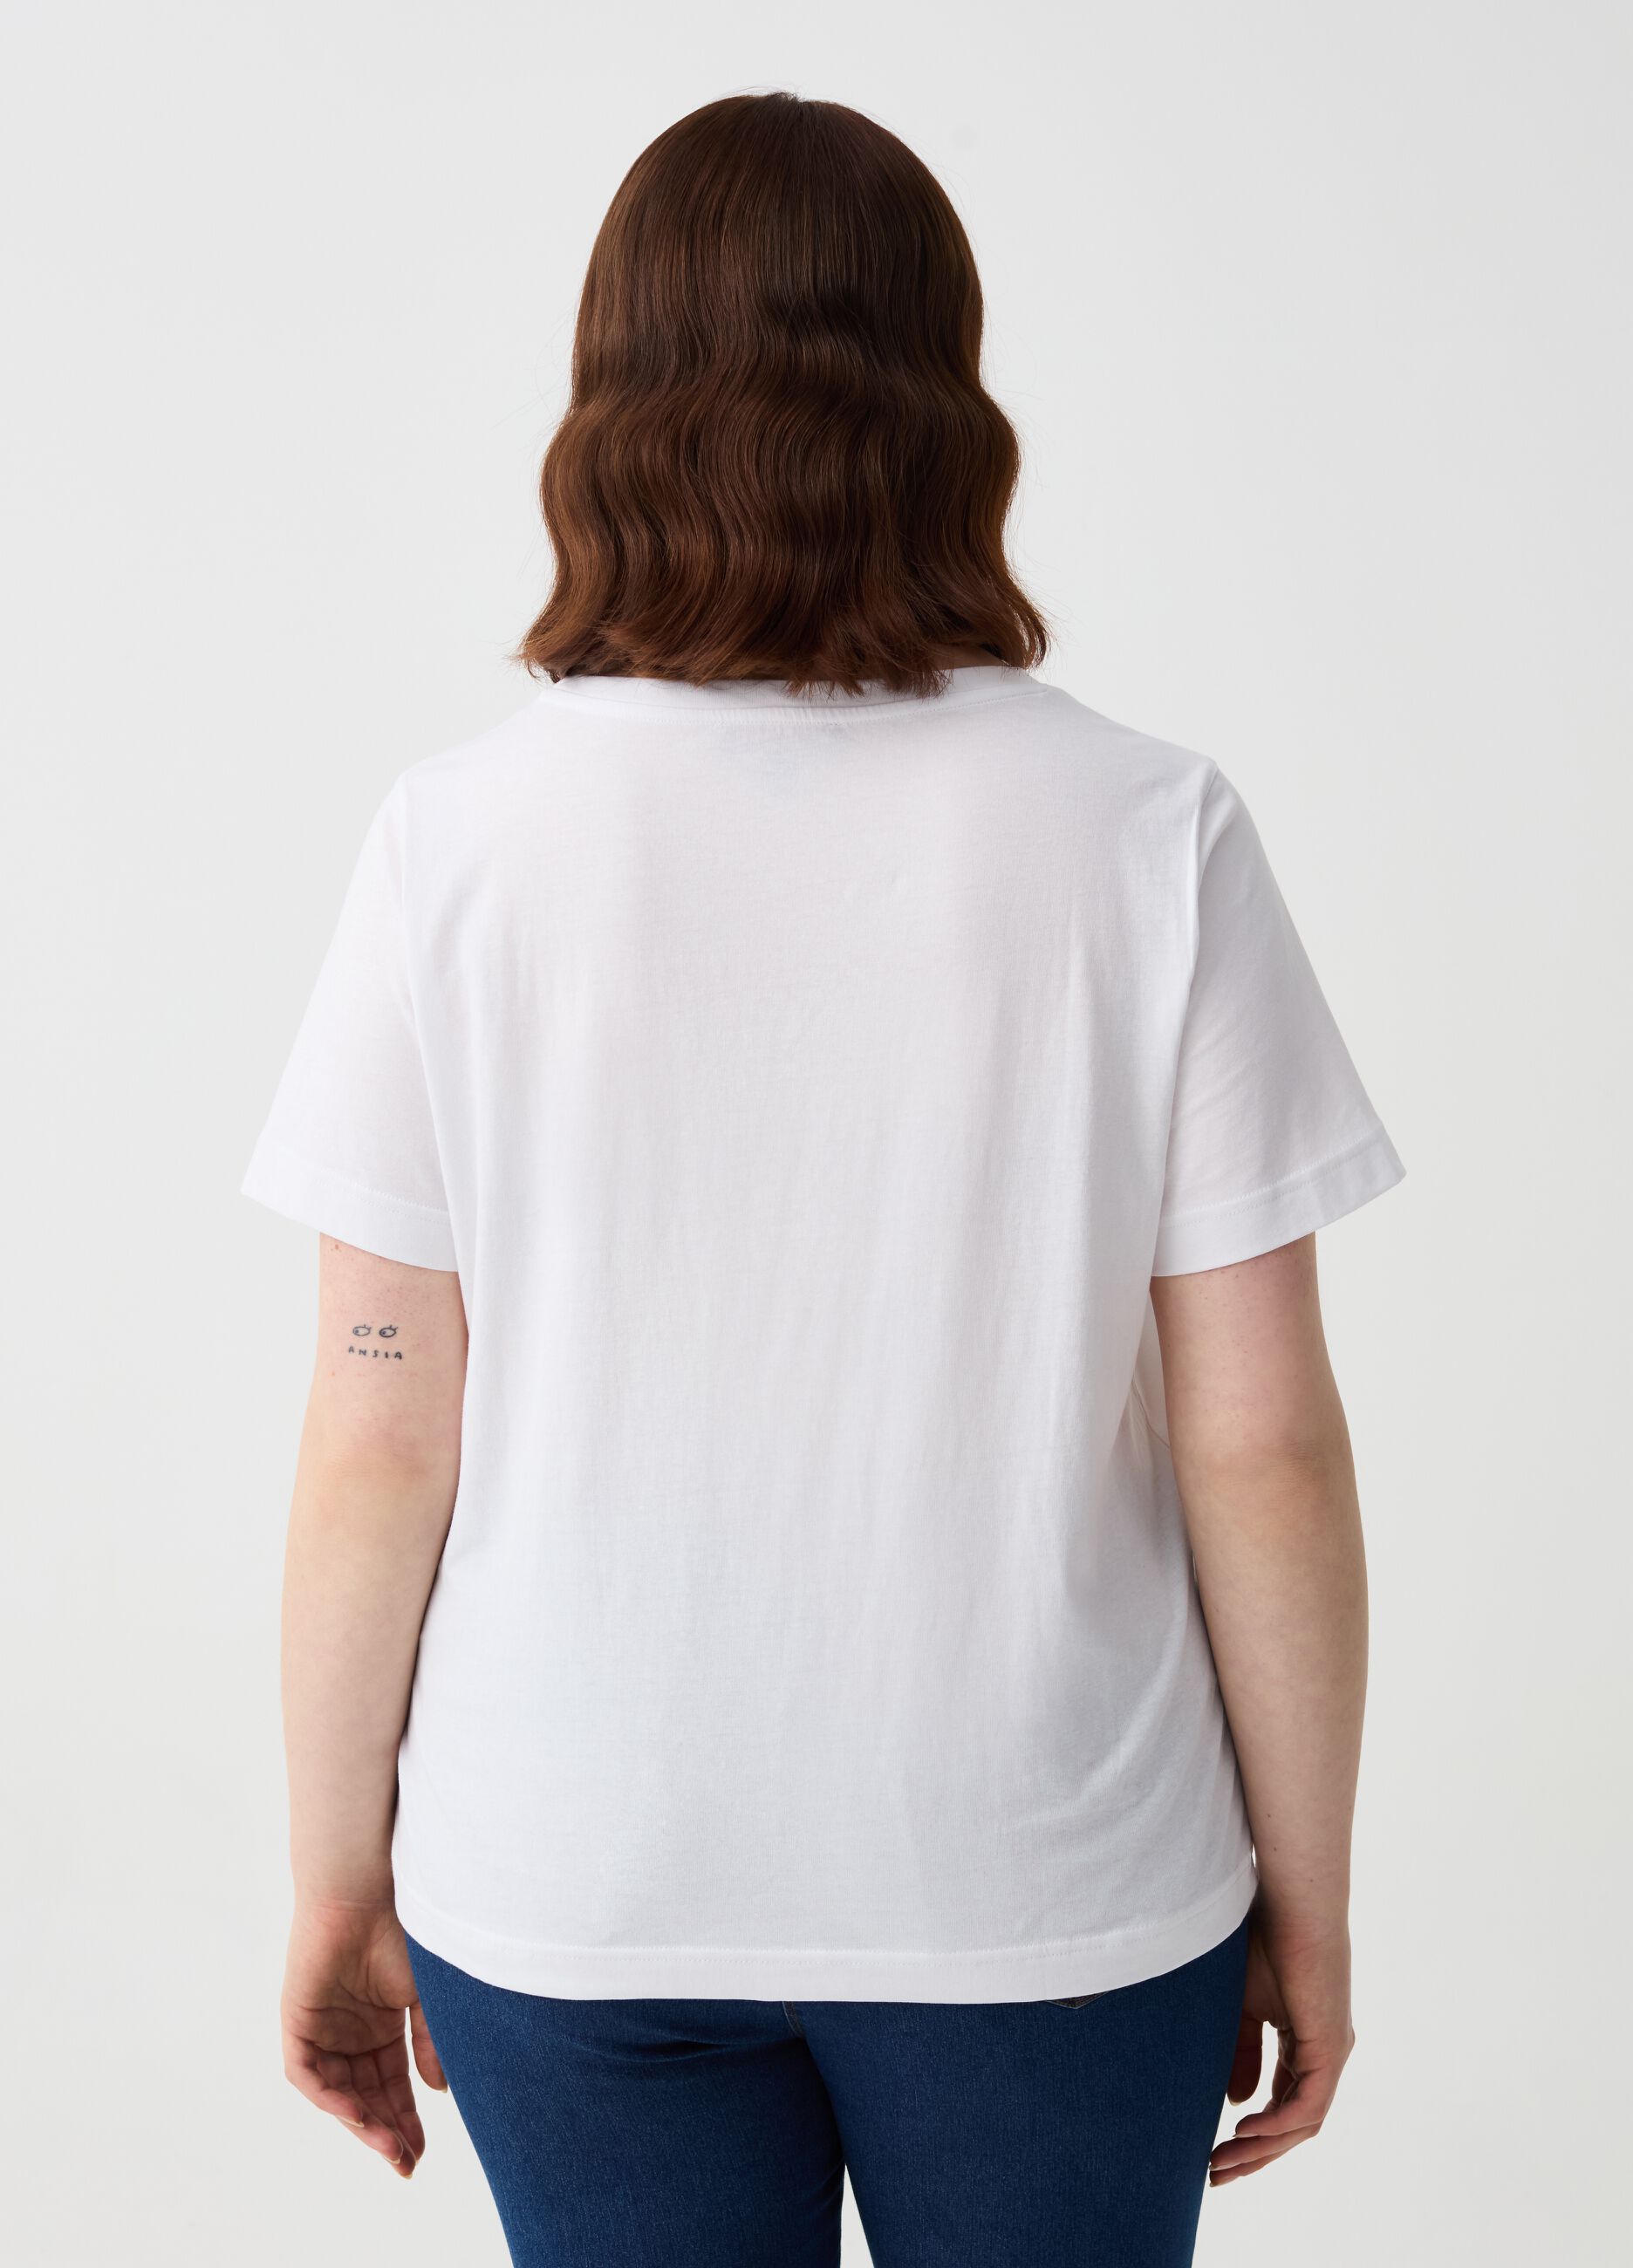 Curvy T-shirt with floral embroidery